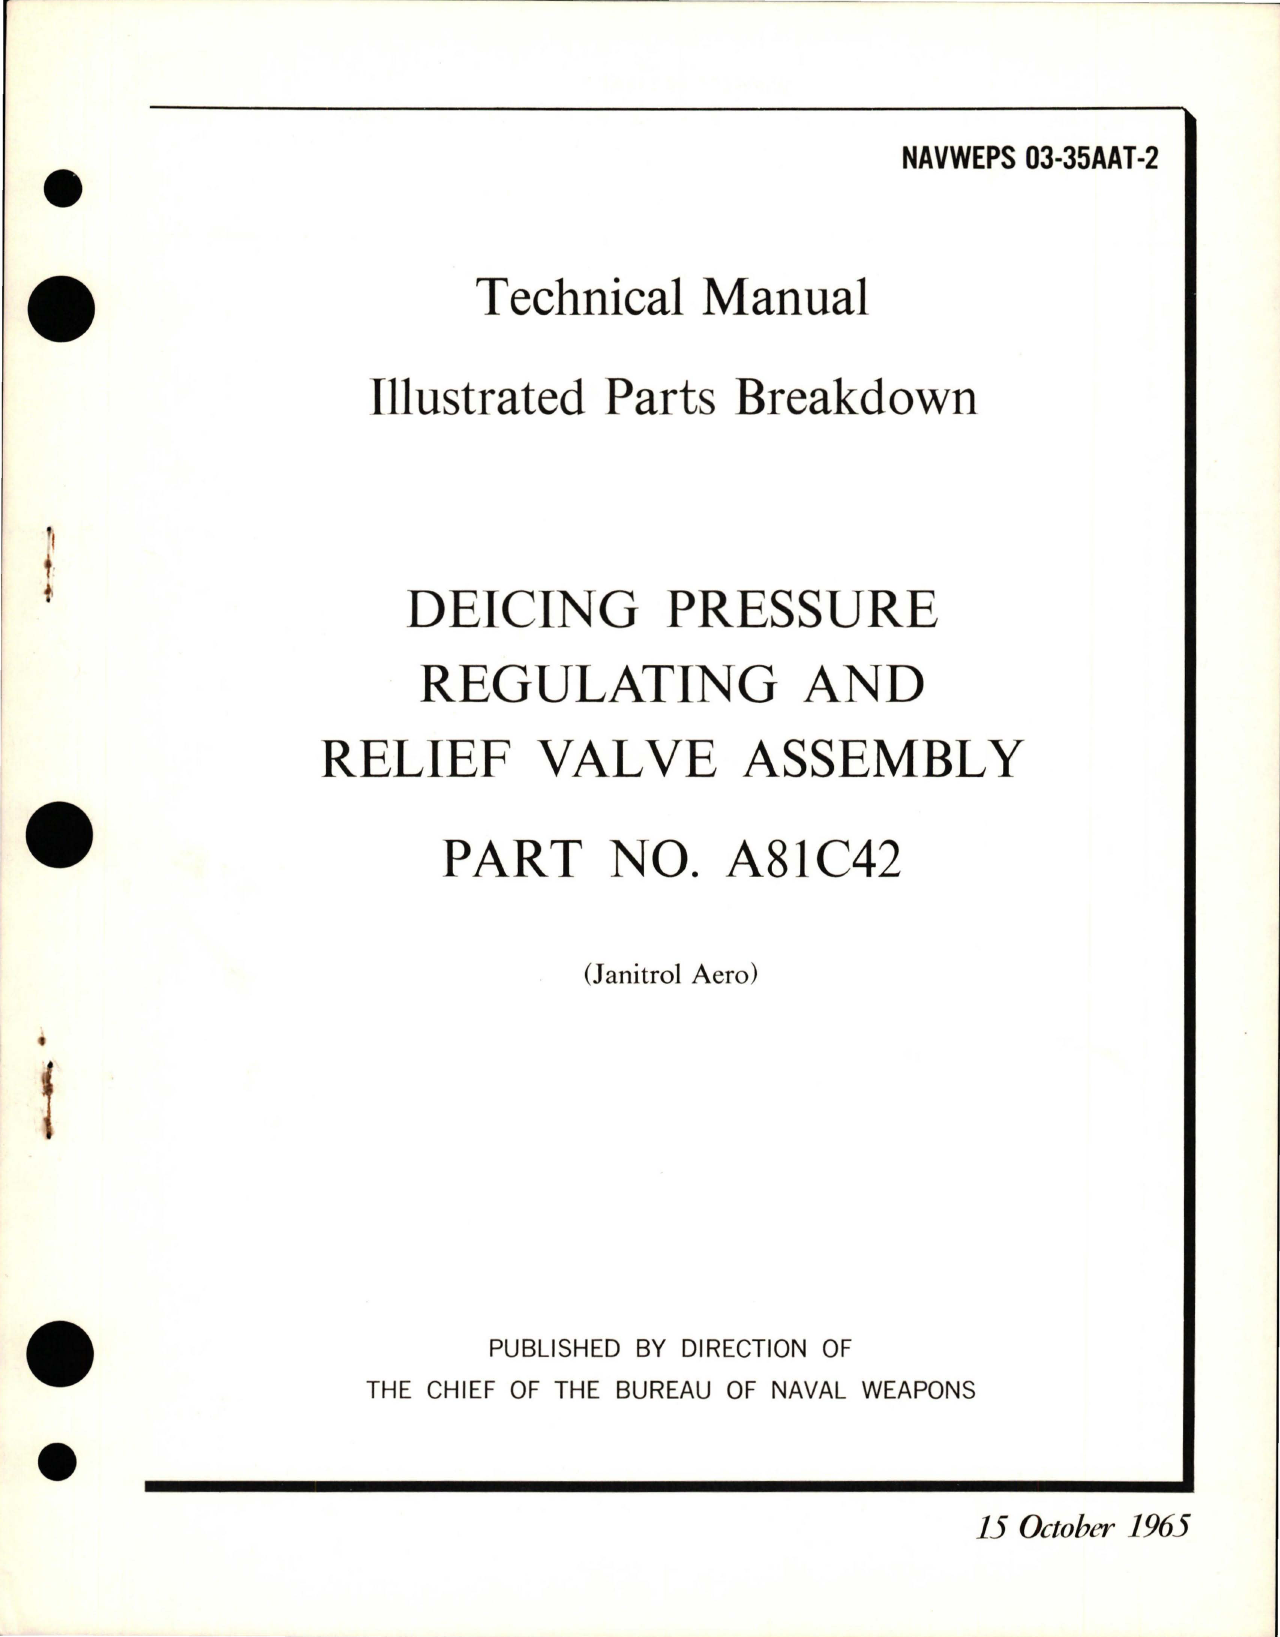 Sample page 1 from AirCorps Library document: Illustrated Parts Breakdown for Deicing Pressure Regulating & Relief Valve Assembly - Part A81C42